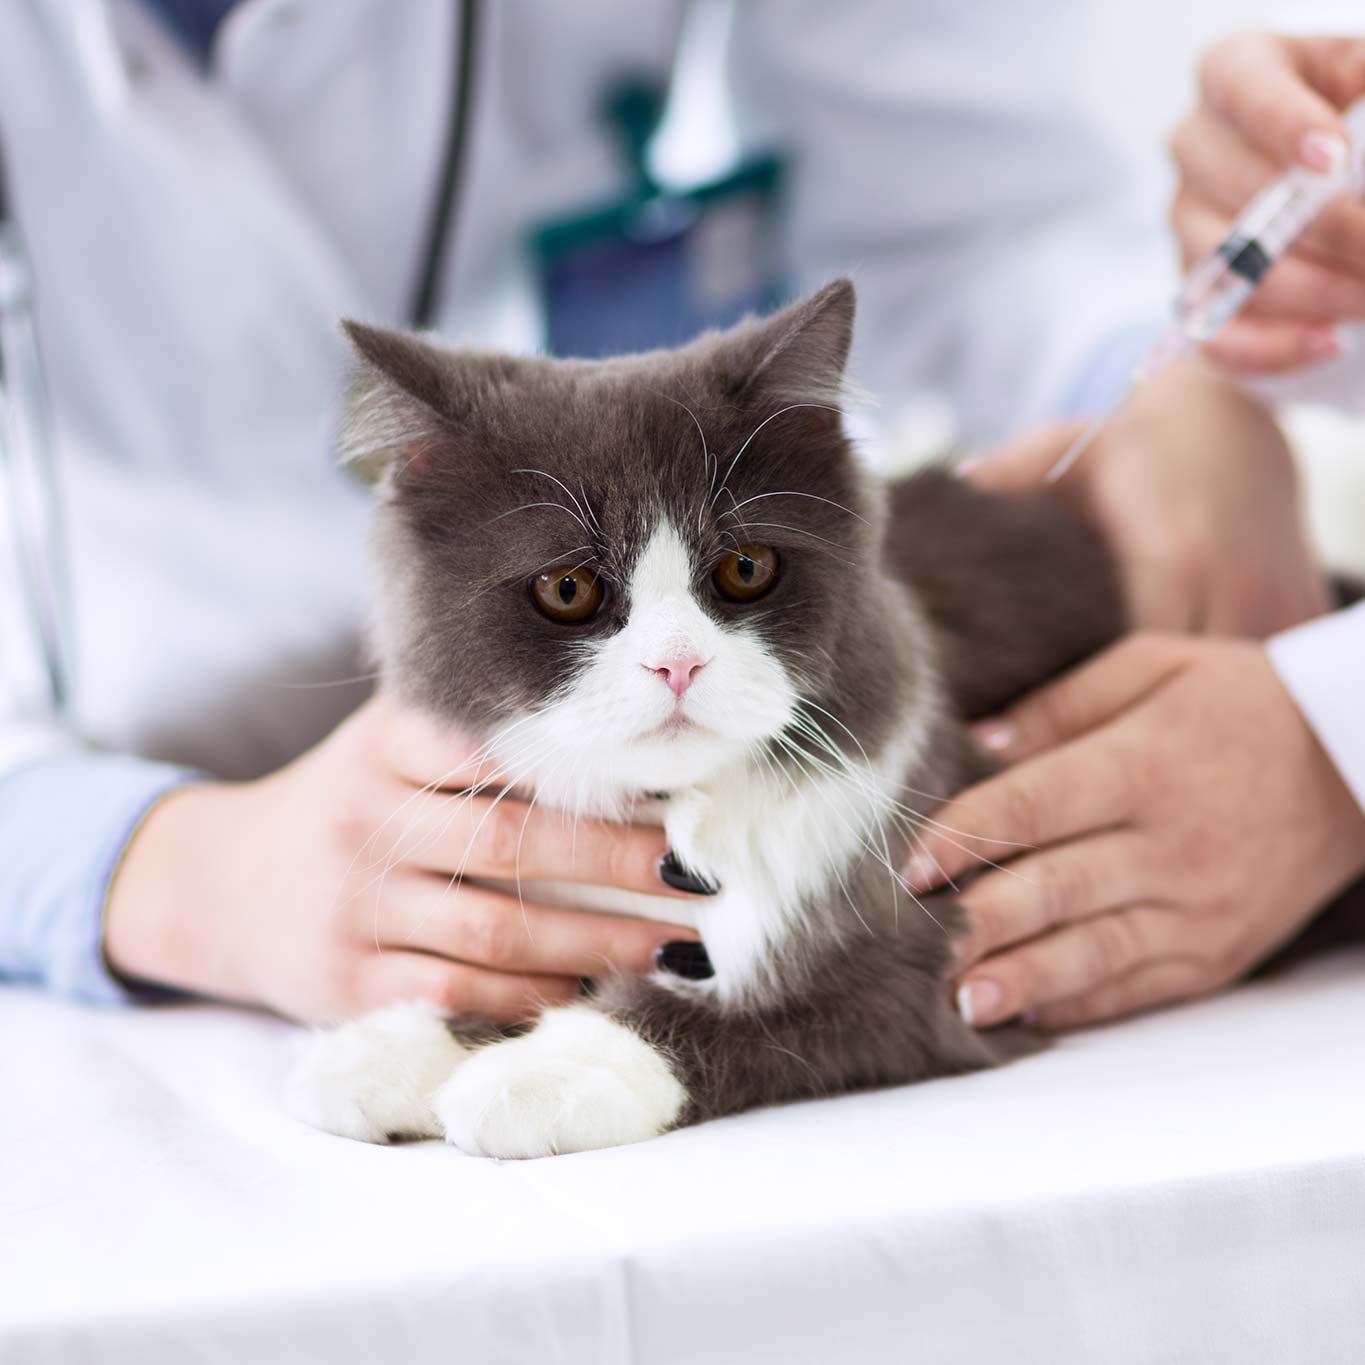 A cat being given an injection